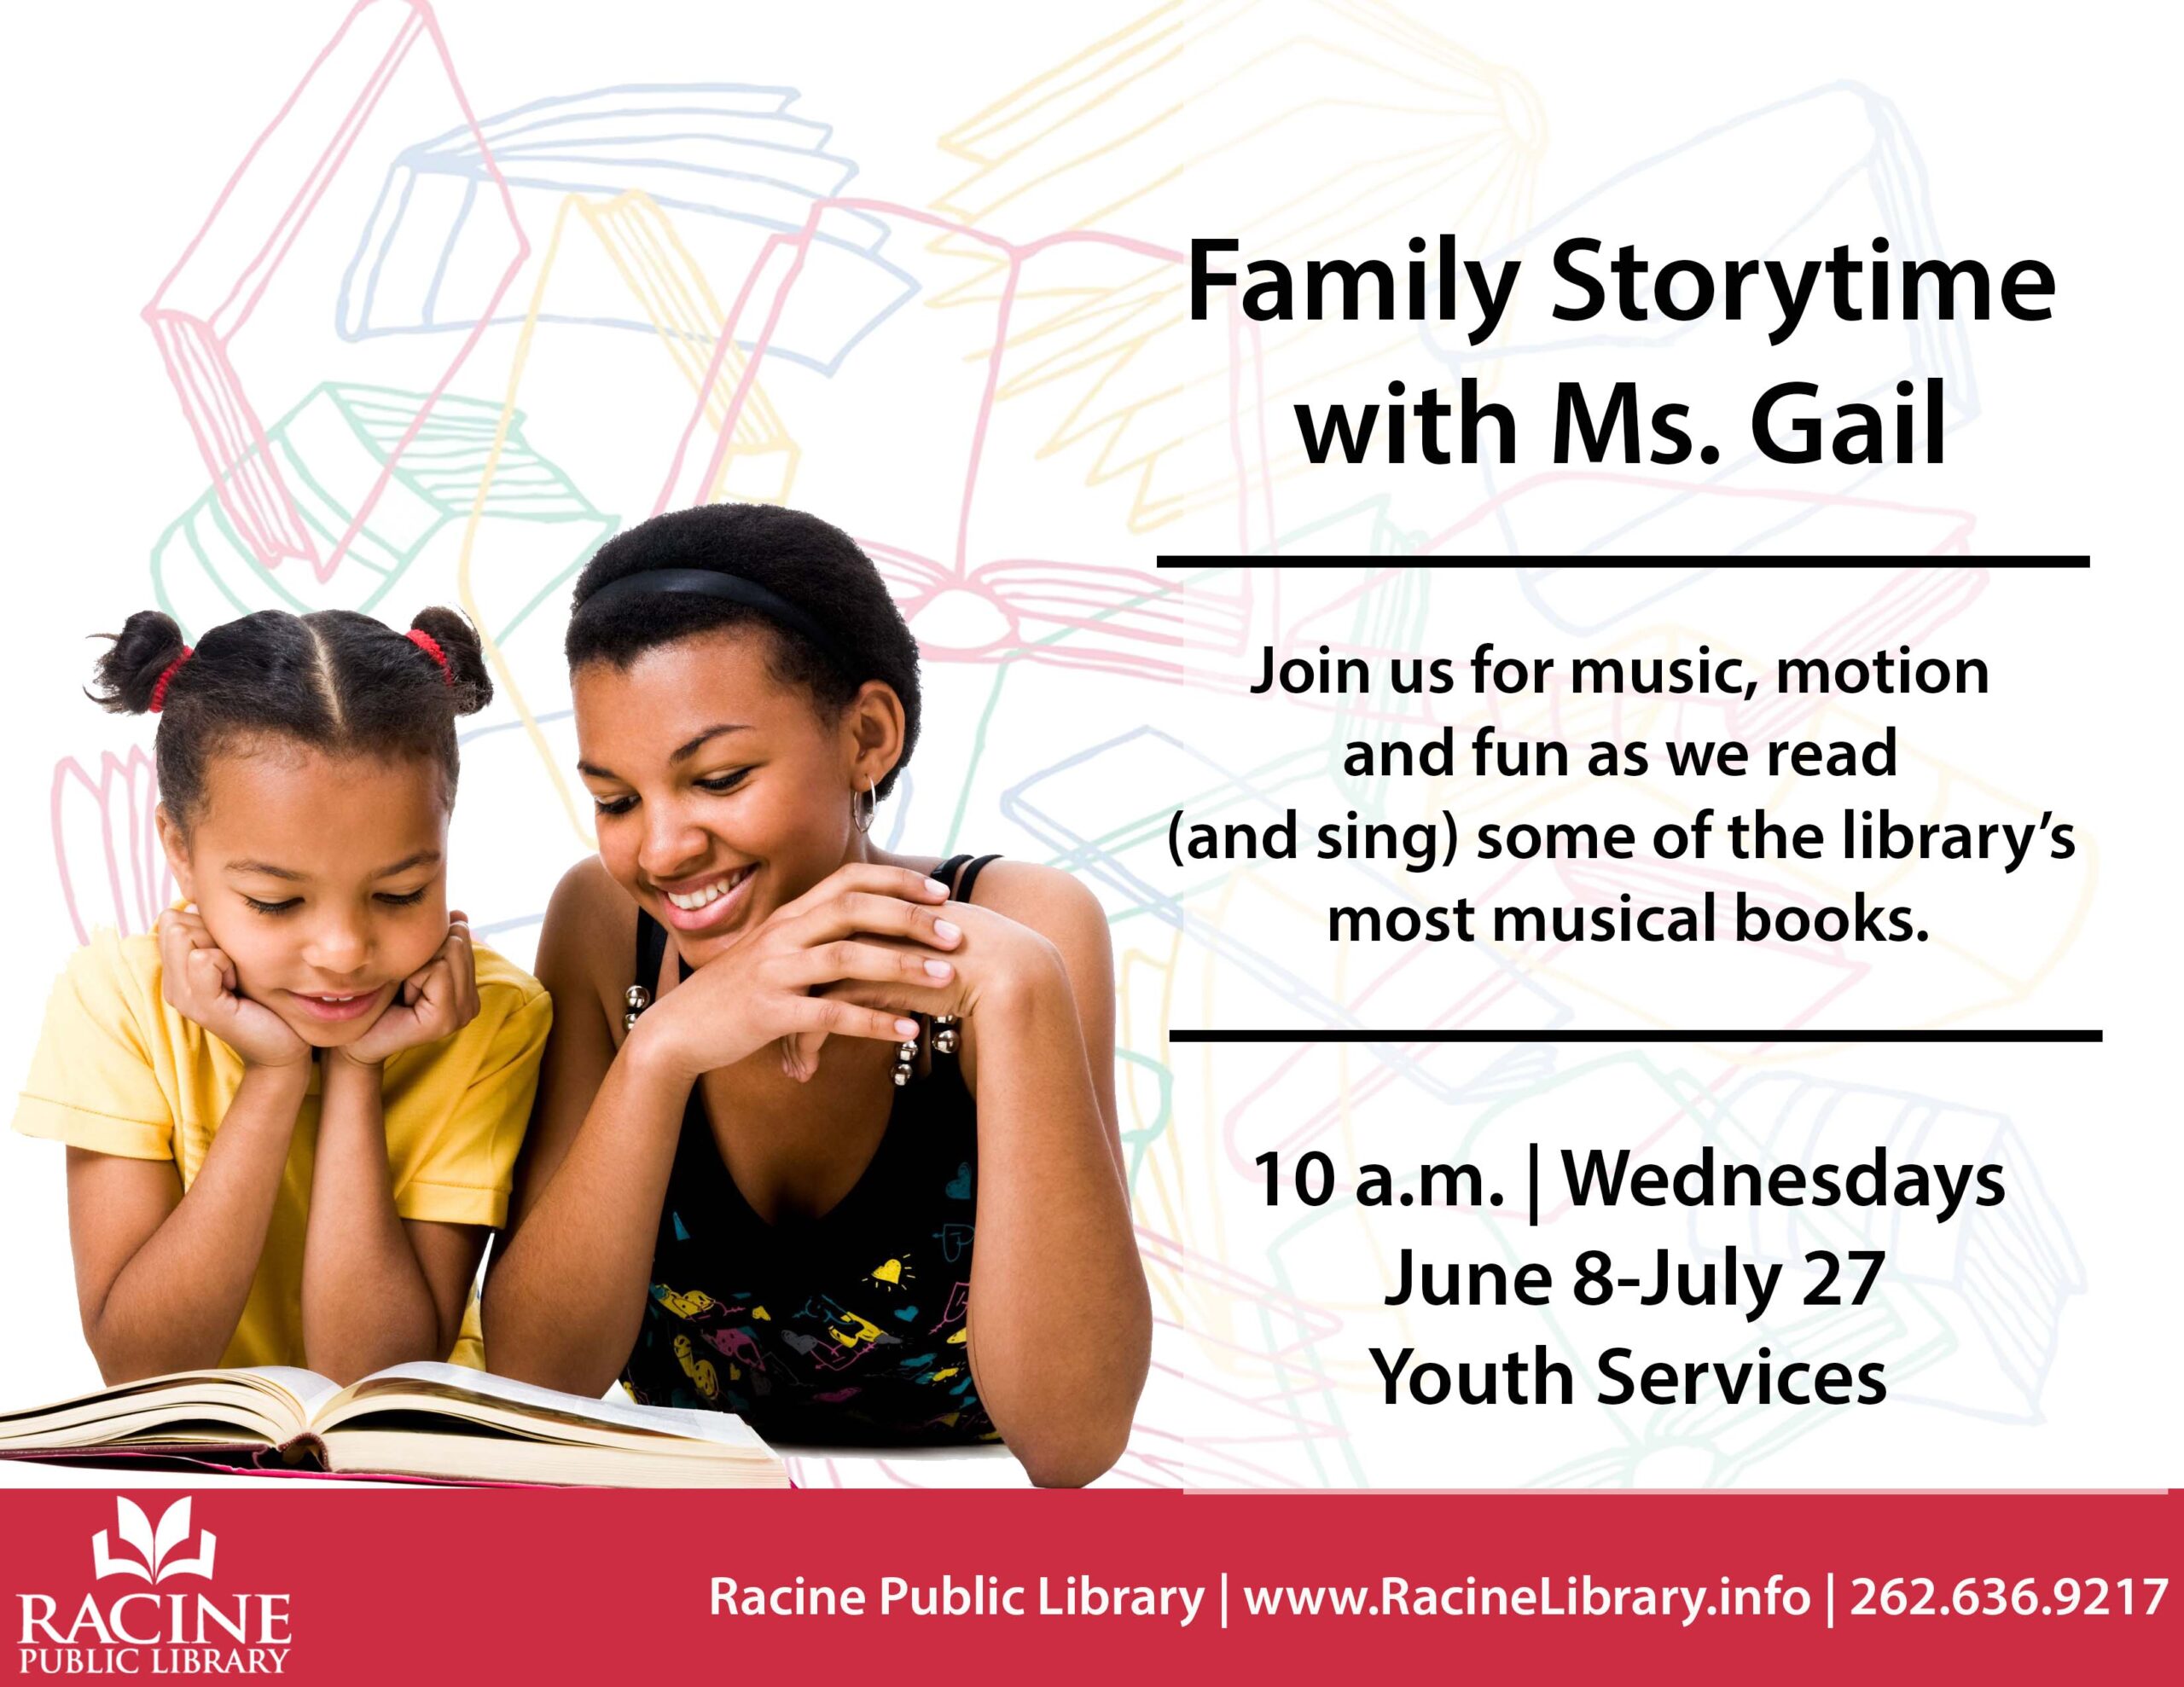 Family Storytime with Ms. Gail. Join us for music, motion and fun as we read (and sing) some of the library's most musical books. 10 a.m. Wednesdays. June 8 to July 27. Youth Services.